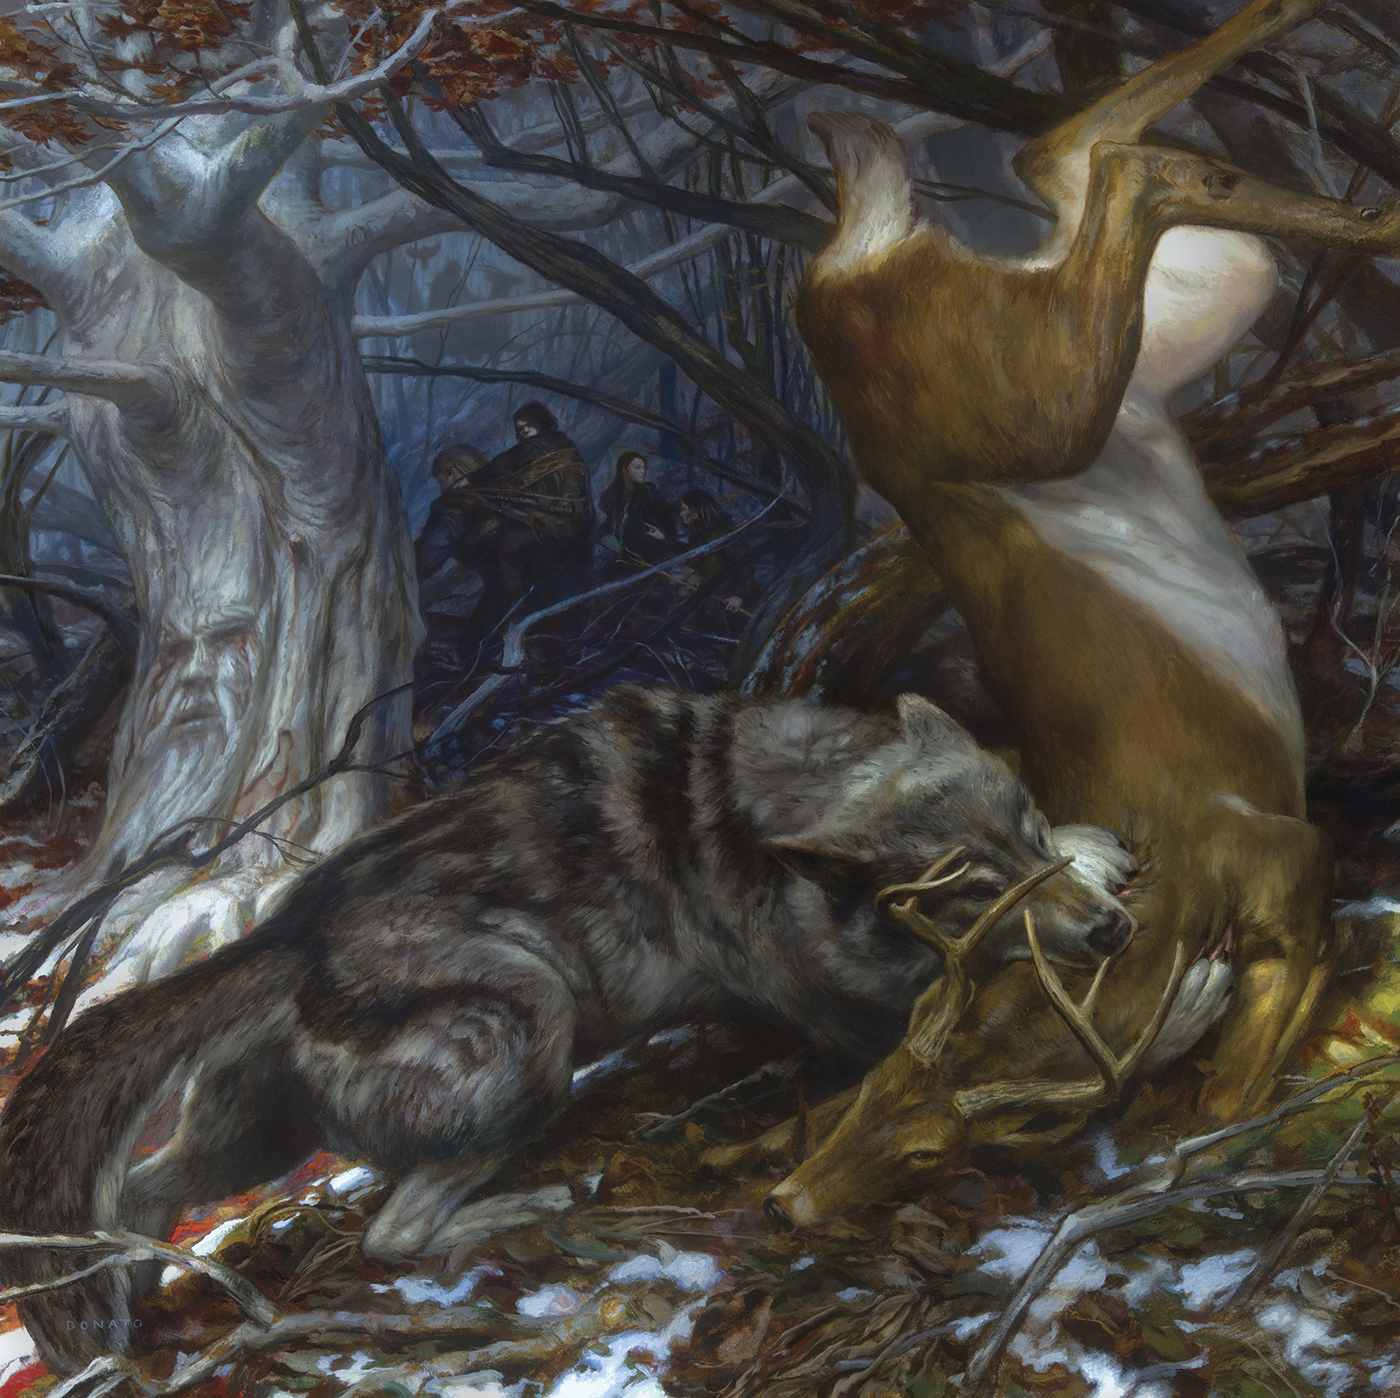 North of the Wall - Brandon Stark
30" x 30"  oil on Panel  2014
Collection of George R.R. Martin